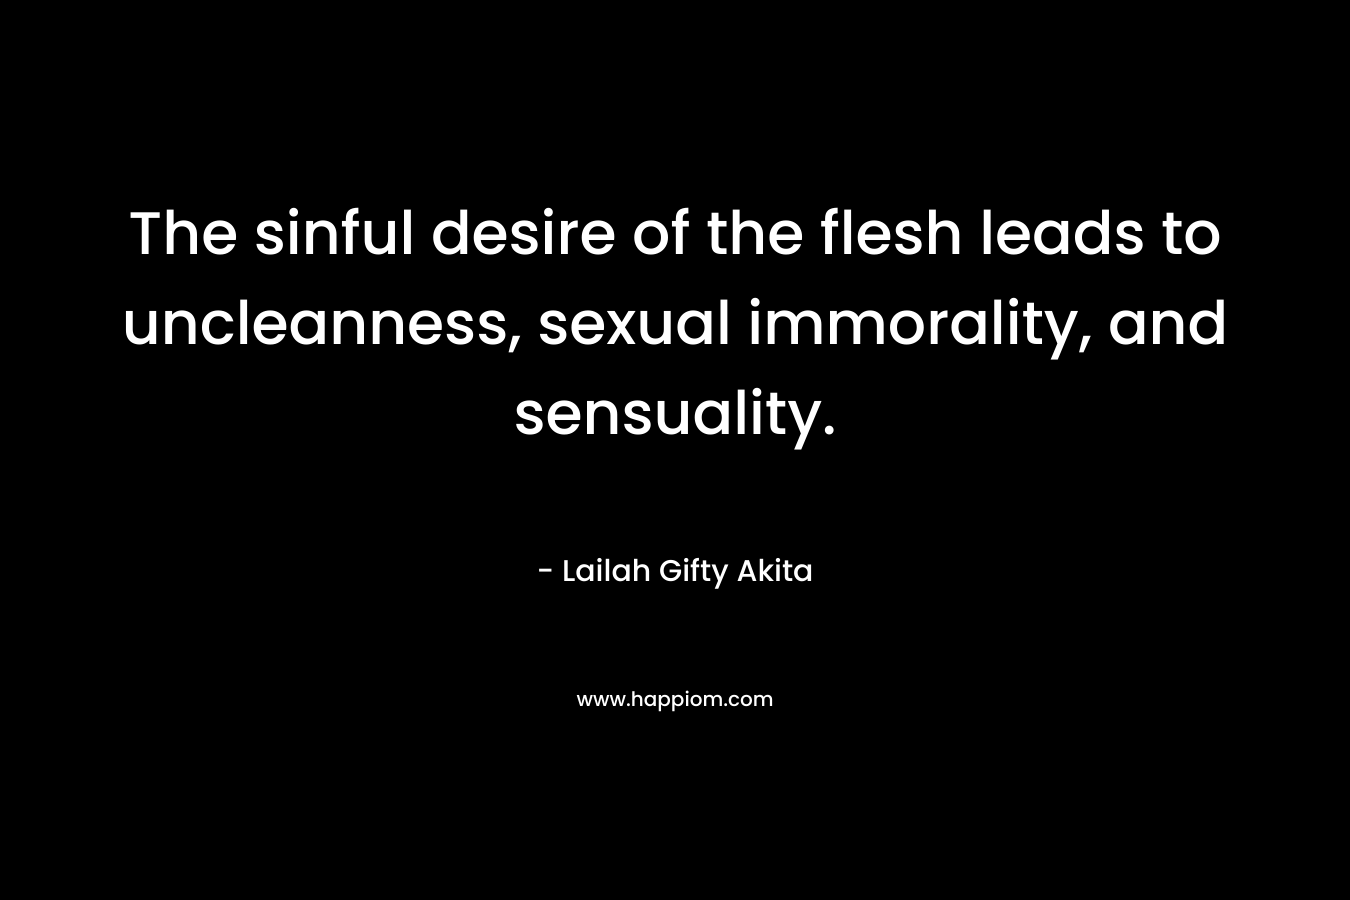 The sinful desire of the flesh leads to uncleanness, sexual immorality, and sensuality.